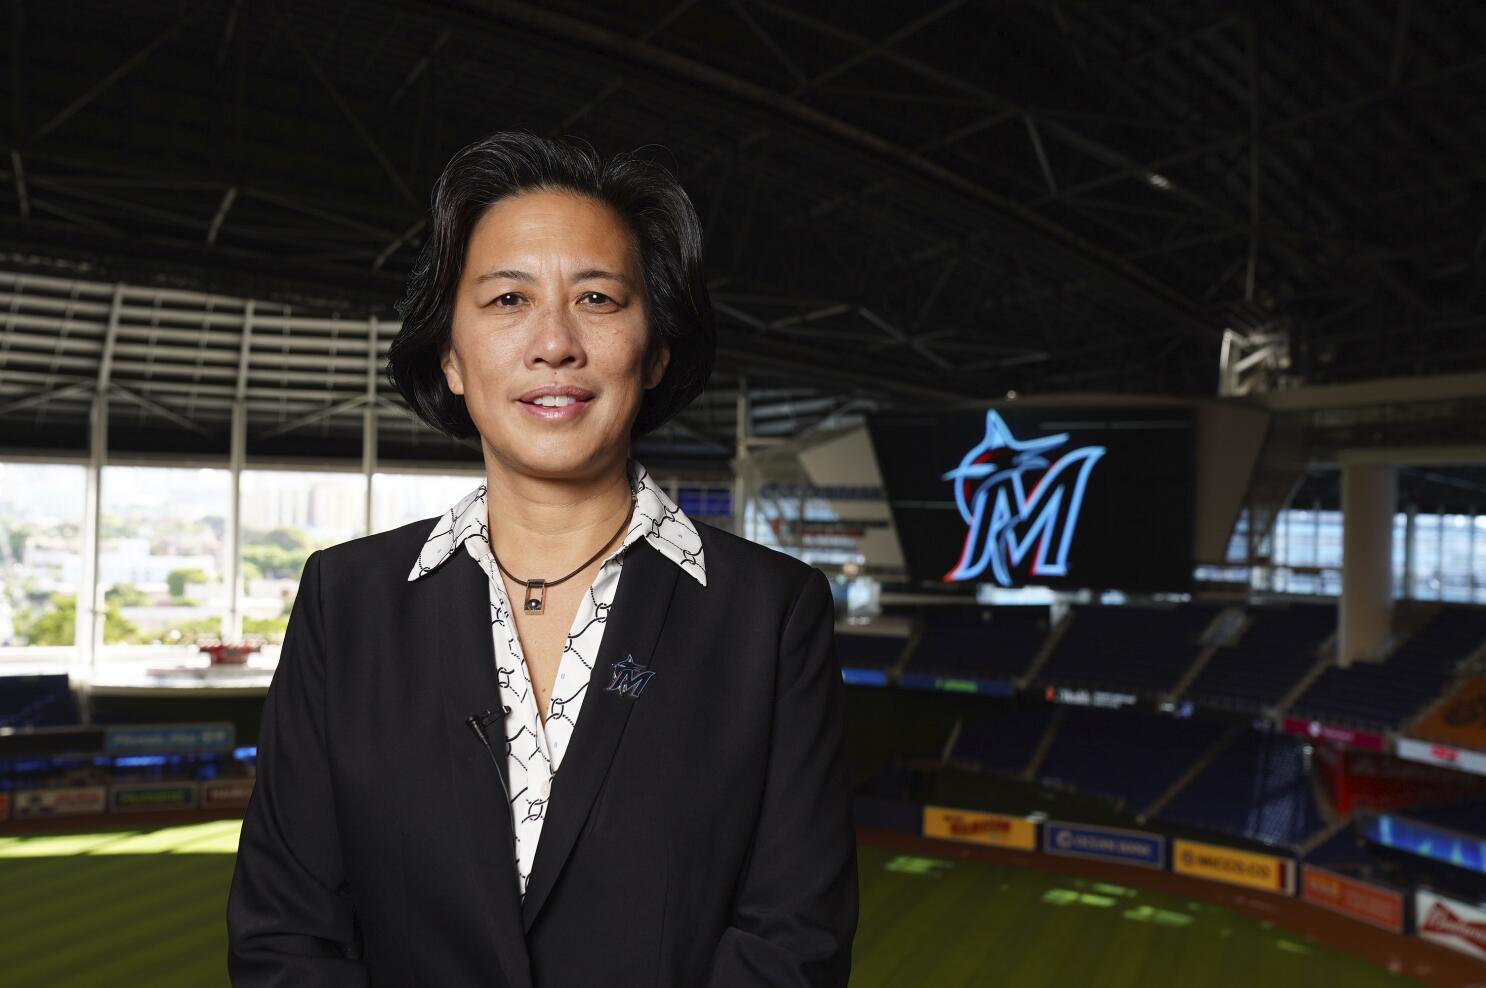 The first female GM in baseball is leading the Marlins' playoff charge, Miami Marlins